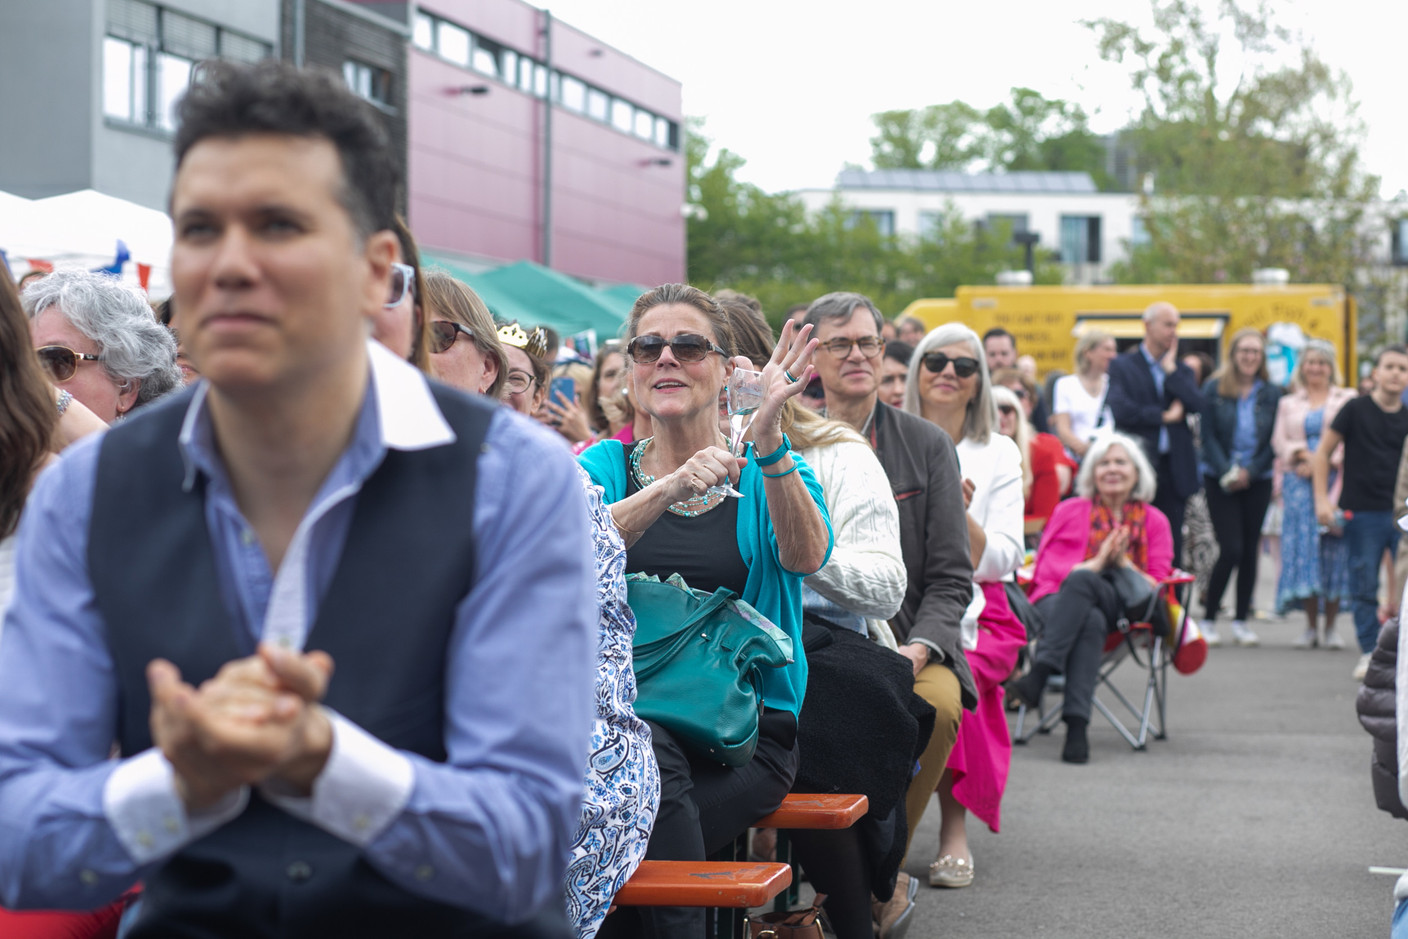 Attendees at St George’s International School celebrating the coronation service of King Charles III and Queen Camilla. Photo: Matic Zorman / Maison Moderne